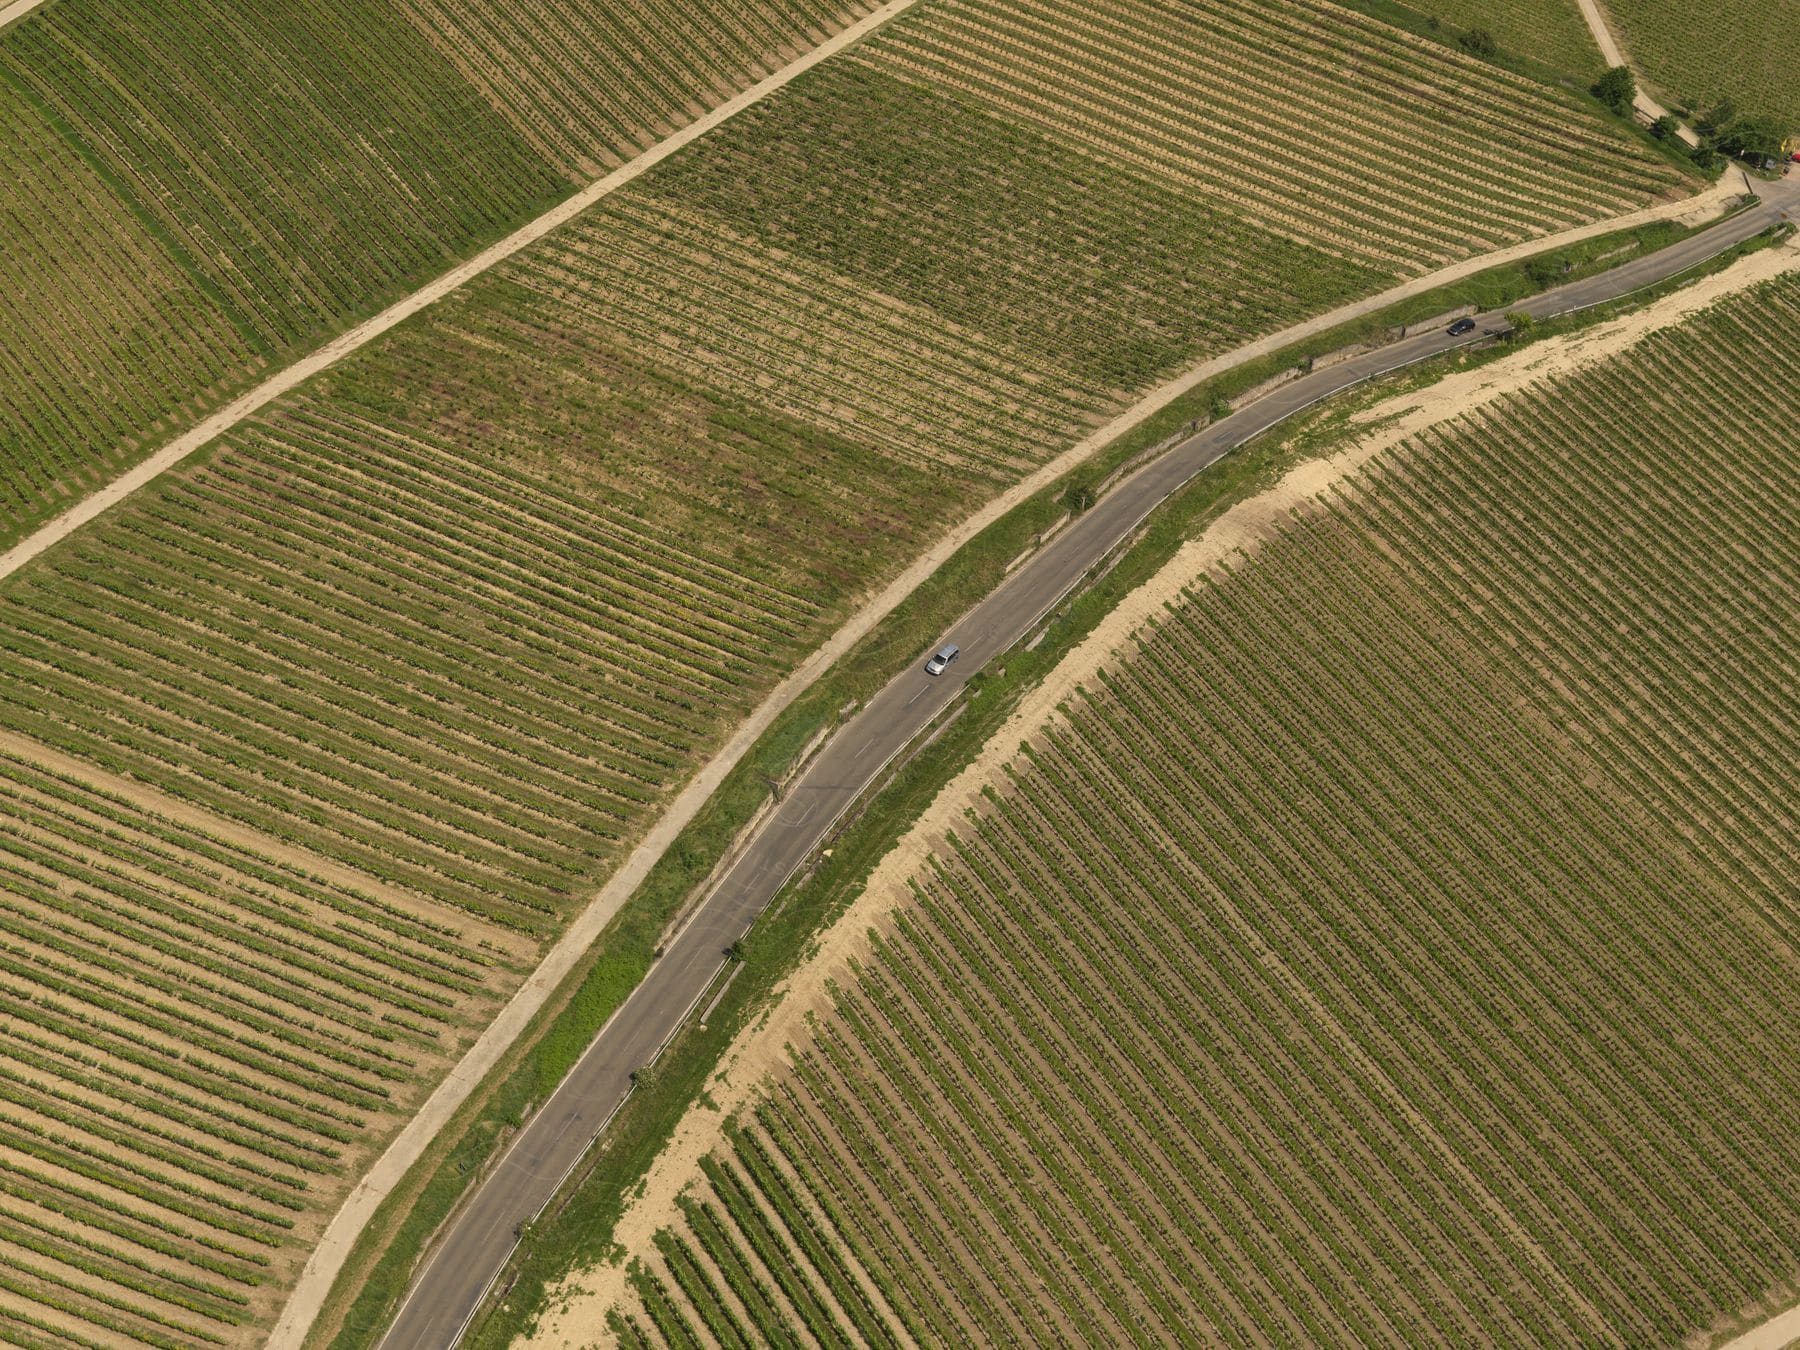 Vehicles drive along a highway through crop land in germany